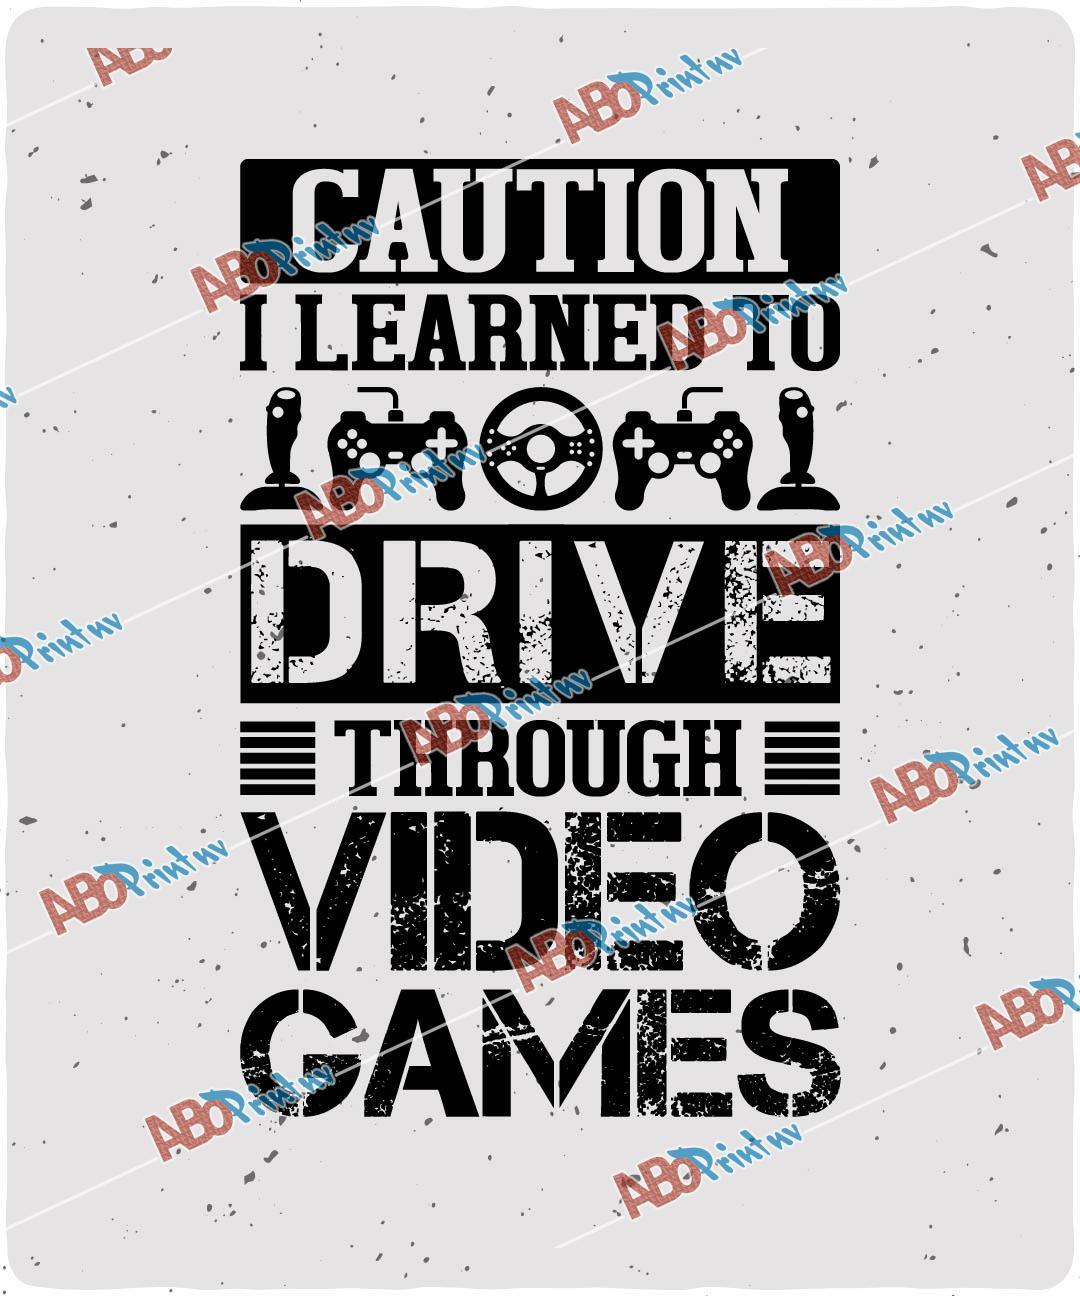 Caution I Learned To Drive Through Video Games.jpg